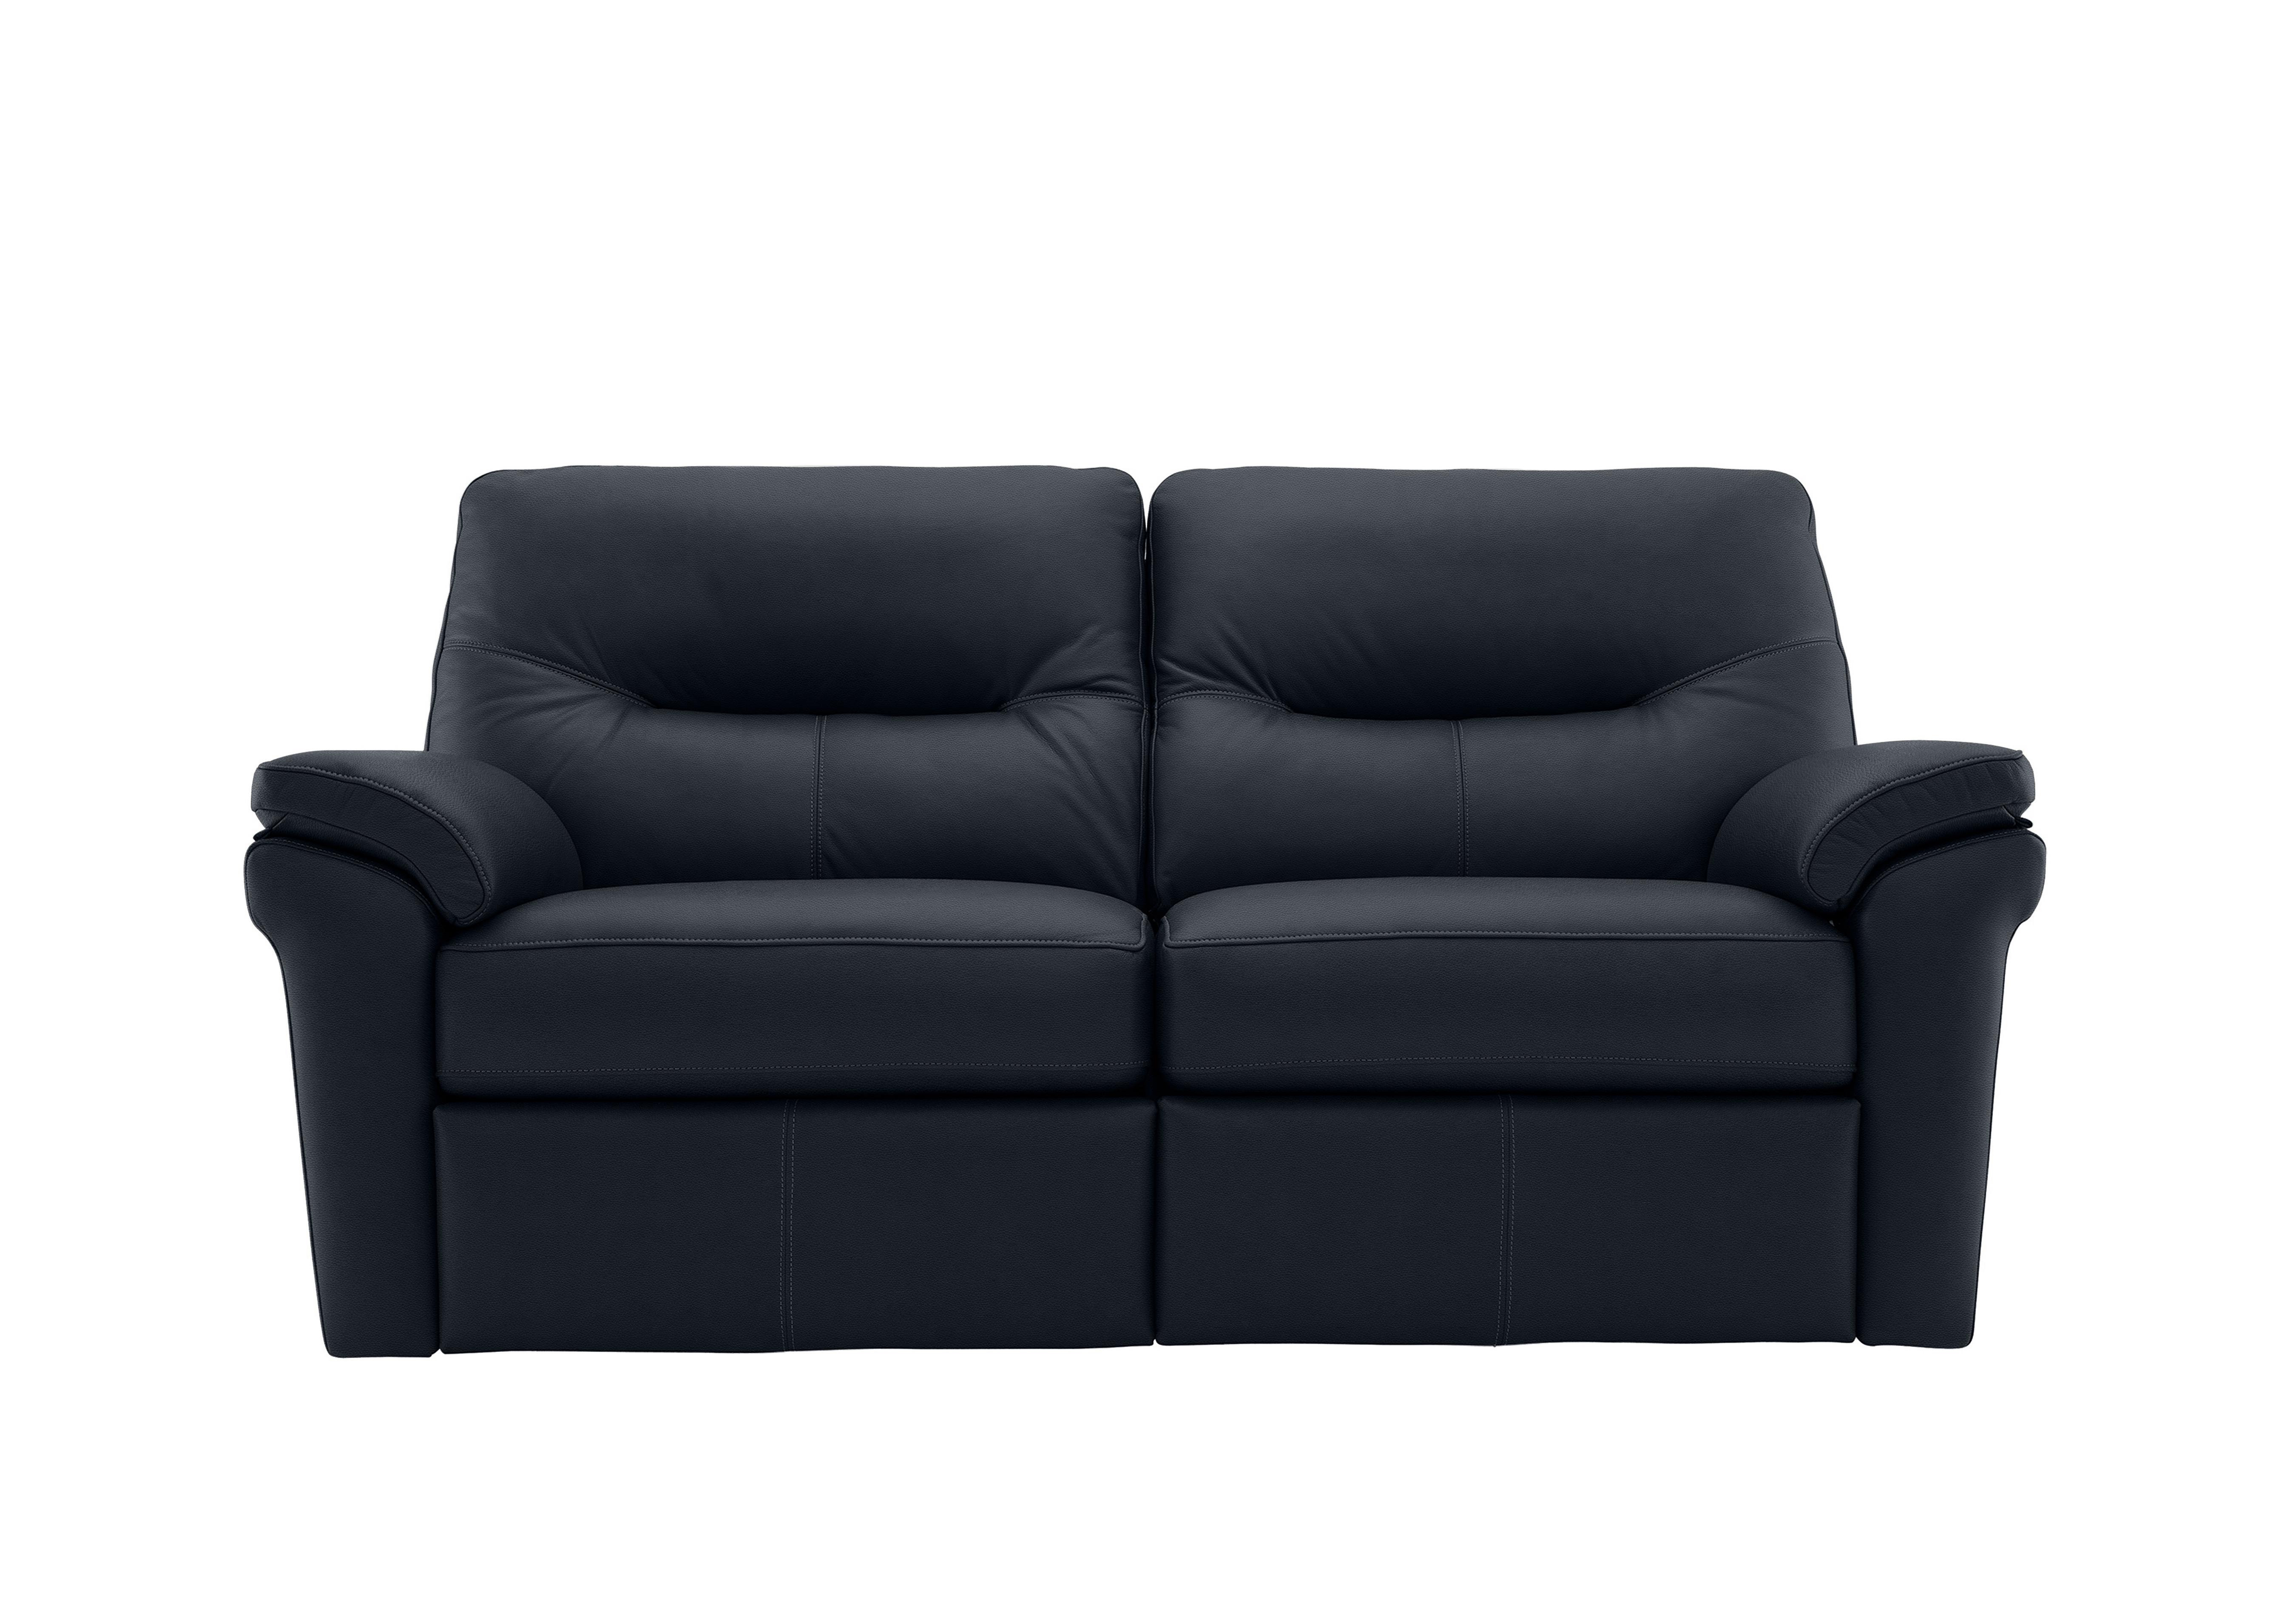 Seattle 2.5 Seater Leather Sofa in L851 Cambridge Navy on Furniture Village